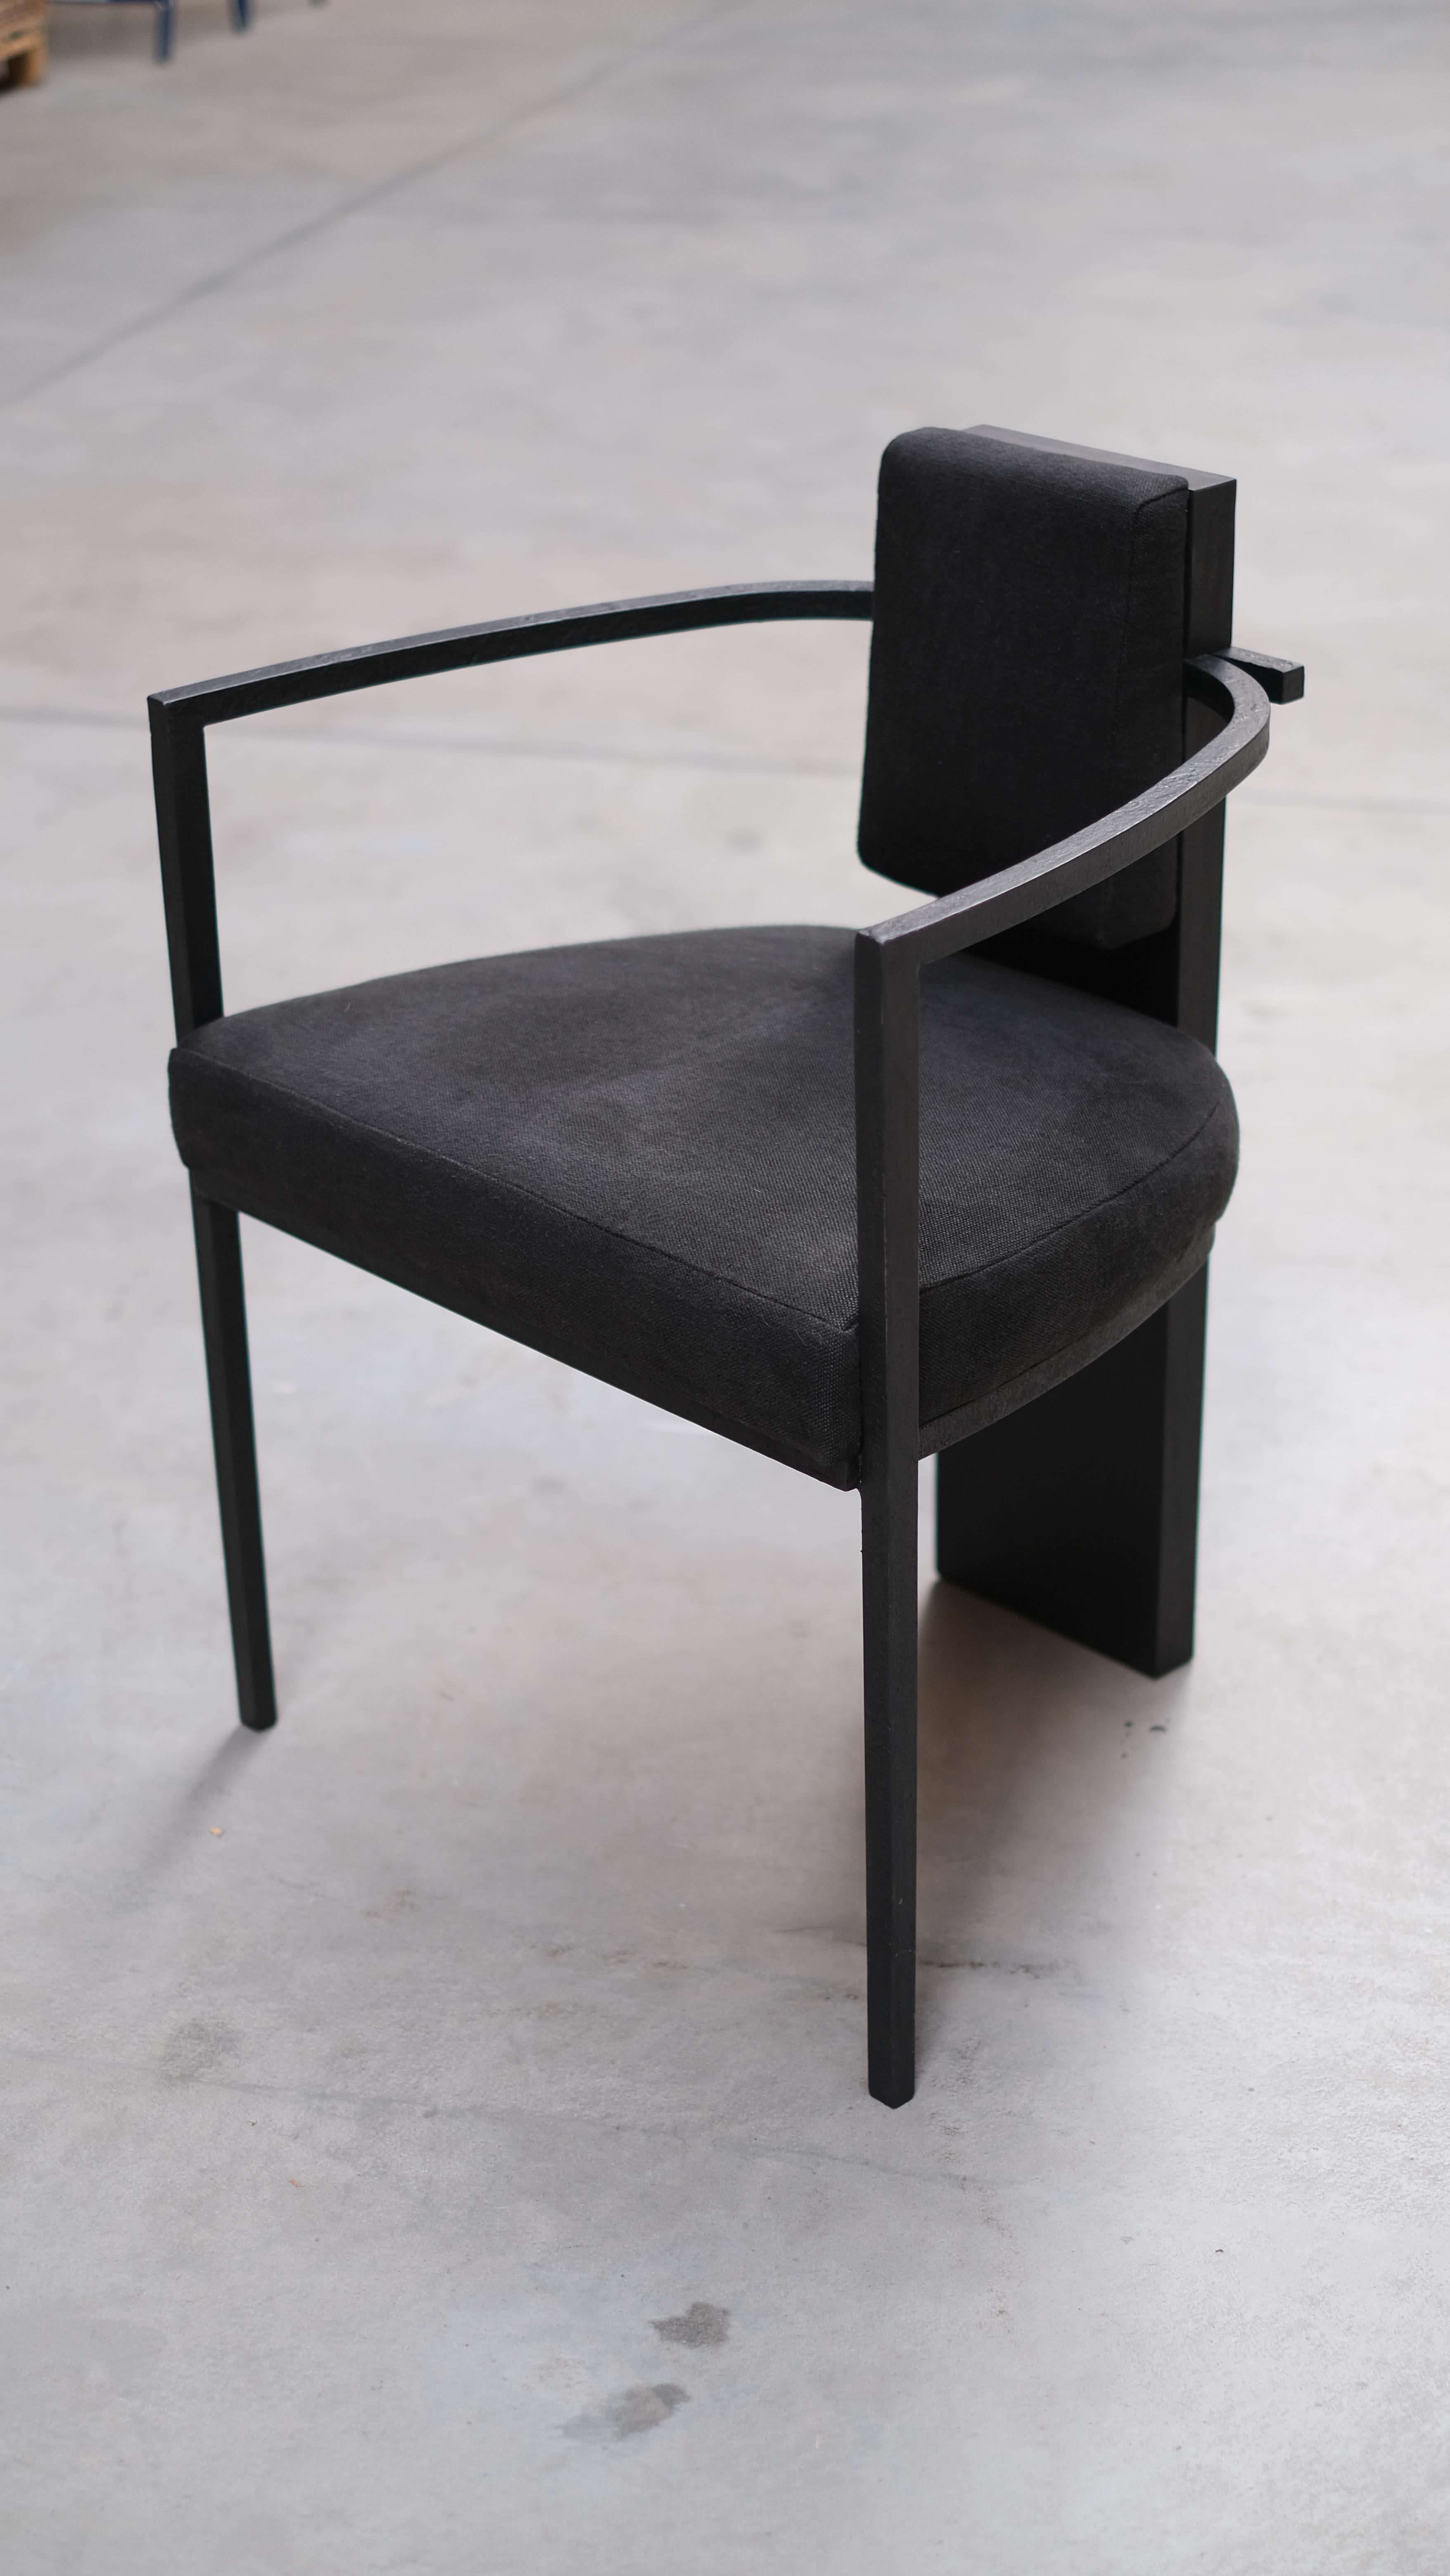 Dining Chair 092022 by Arno Declercq
Dimensions: D 50 x W 60 x H 73 cm. 
Materials: Burned African Walnut, burned steel Belgium Linen.

Arno Declercq
Belgian designer and art dealer who makes bespoke objects with passion for design, atmosphere,